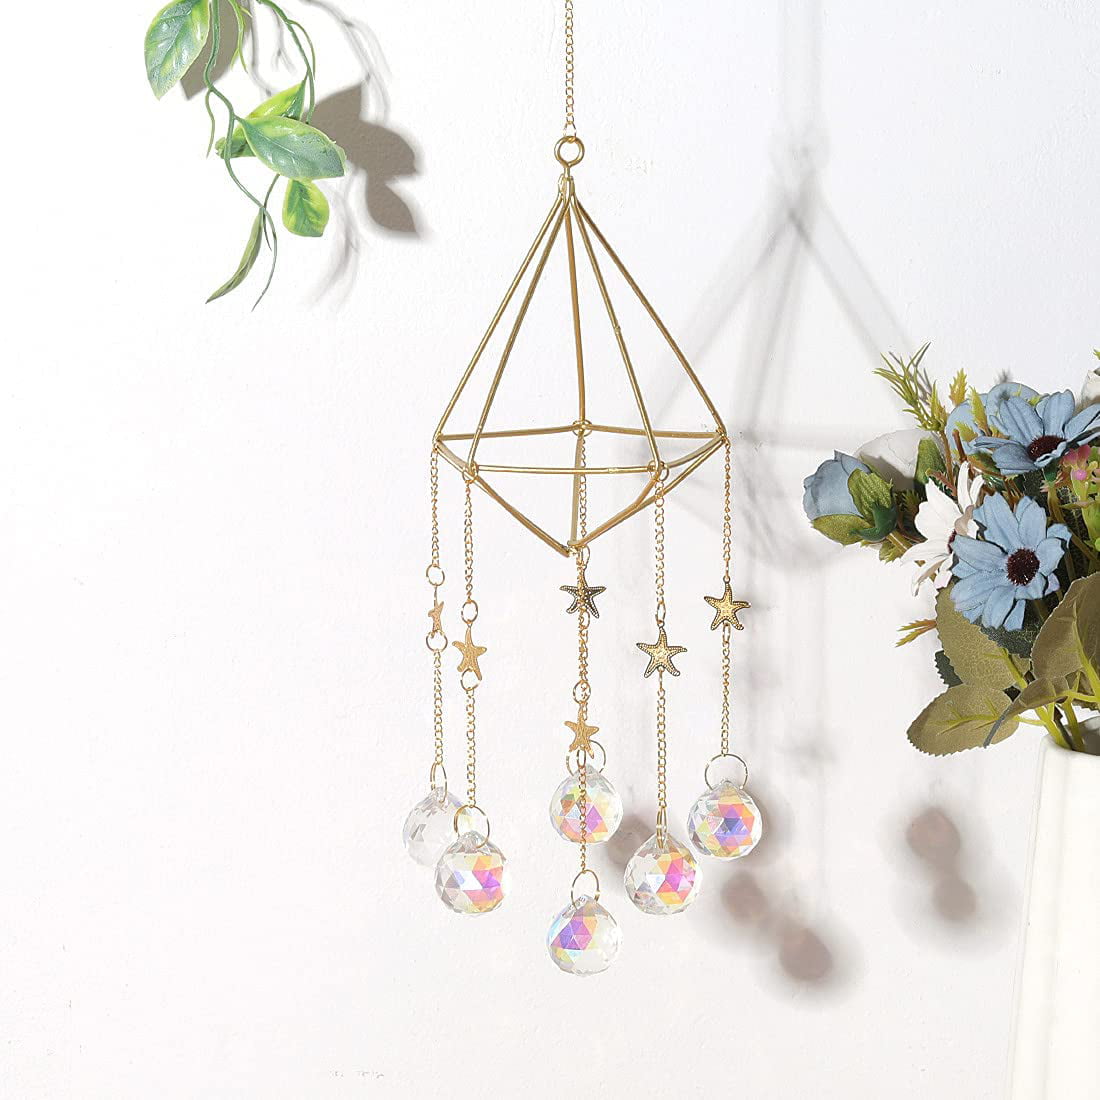 Clear Cut Crystal Ball Prisms Chandelier Sun Catcher,Cute Dragonfly Hanging Crystals Ornament,Home Garden Office Wedding Christmas Party Decoration with Gift Box 